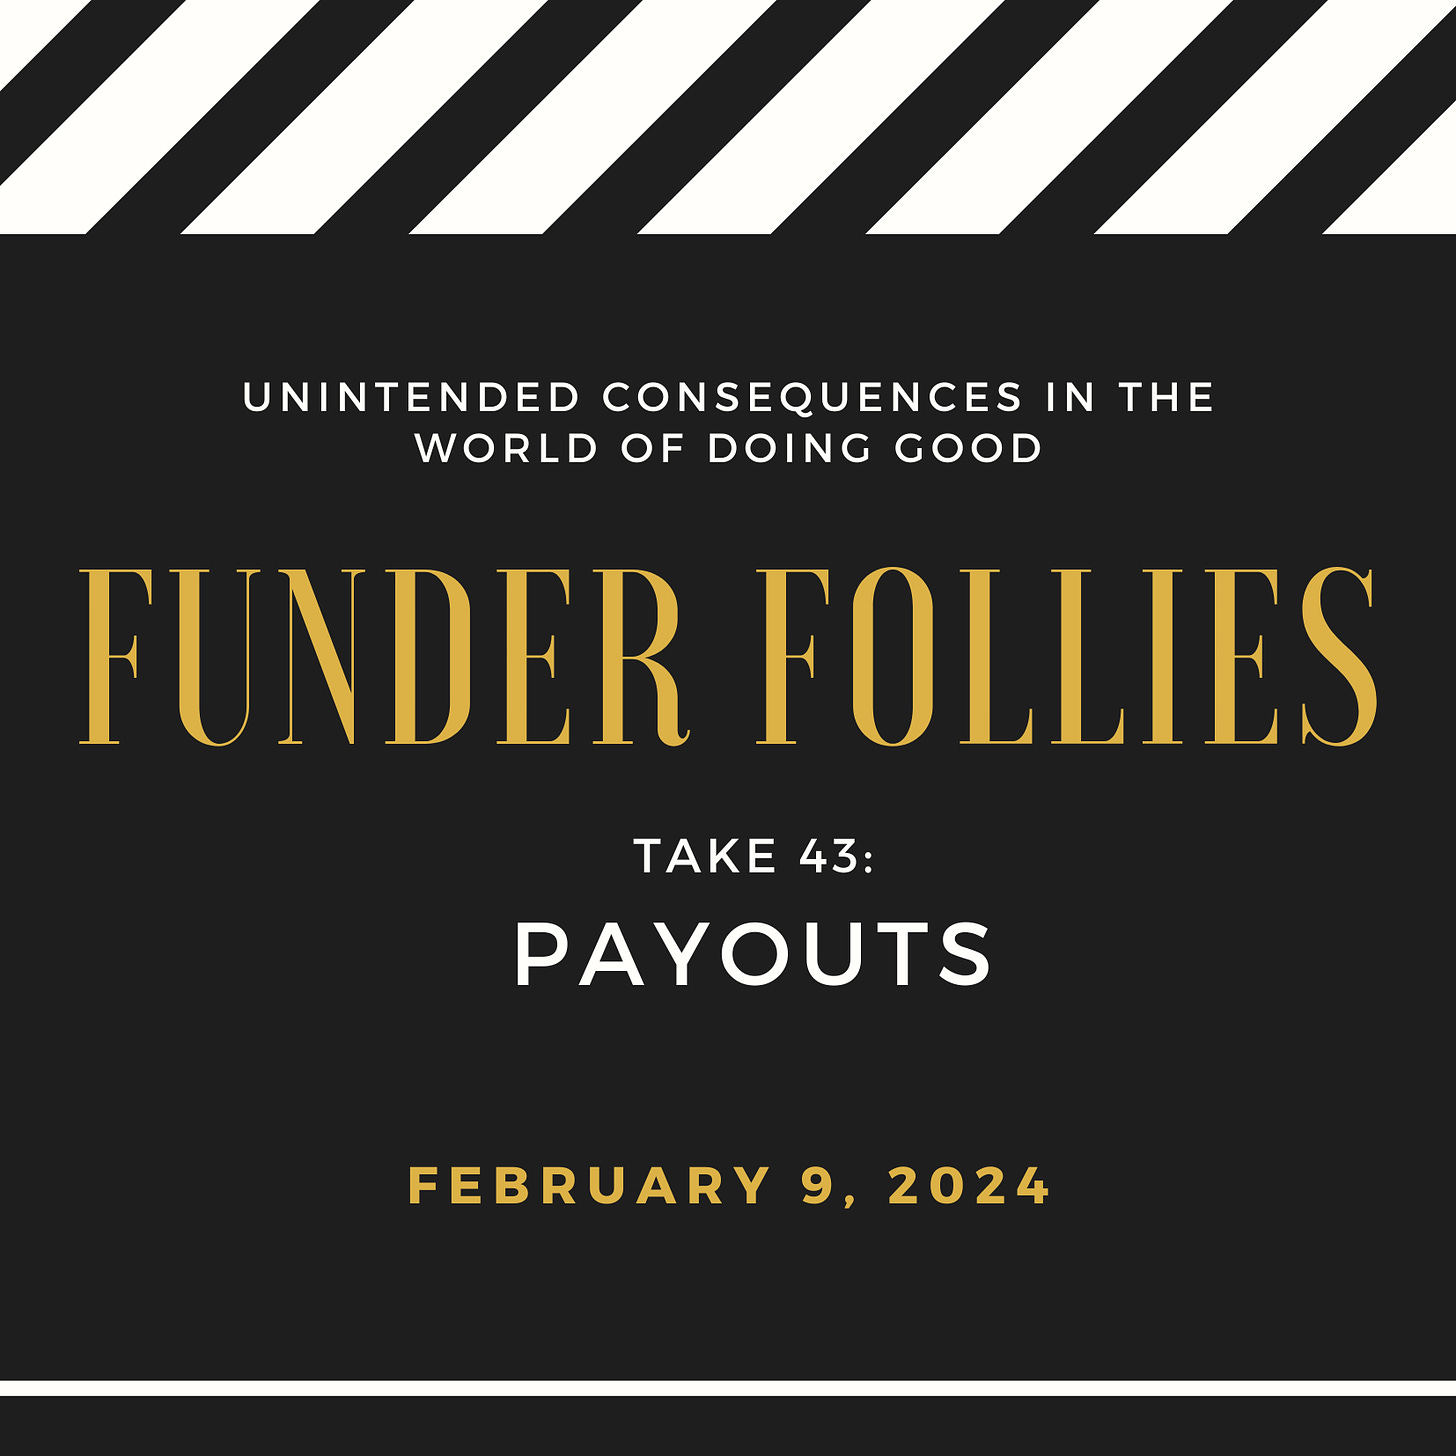 black and white film clapper board showing Funder Follies, Unintended Consequences of Doing Good, Take # 43 Payouts, February 9, 2024